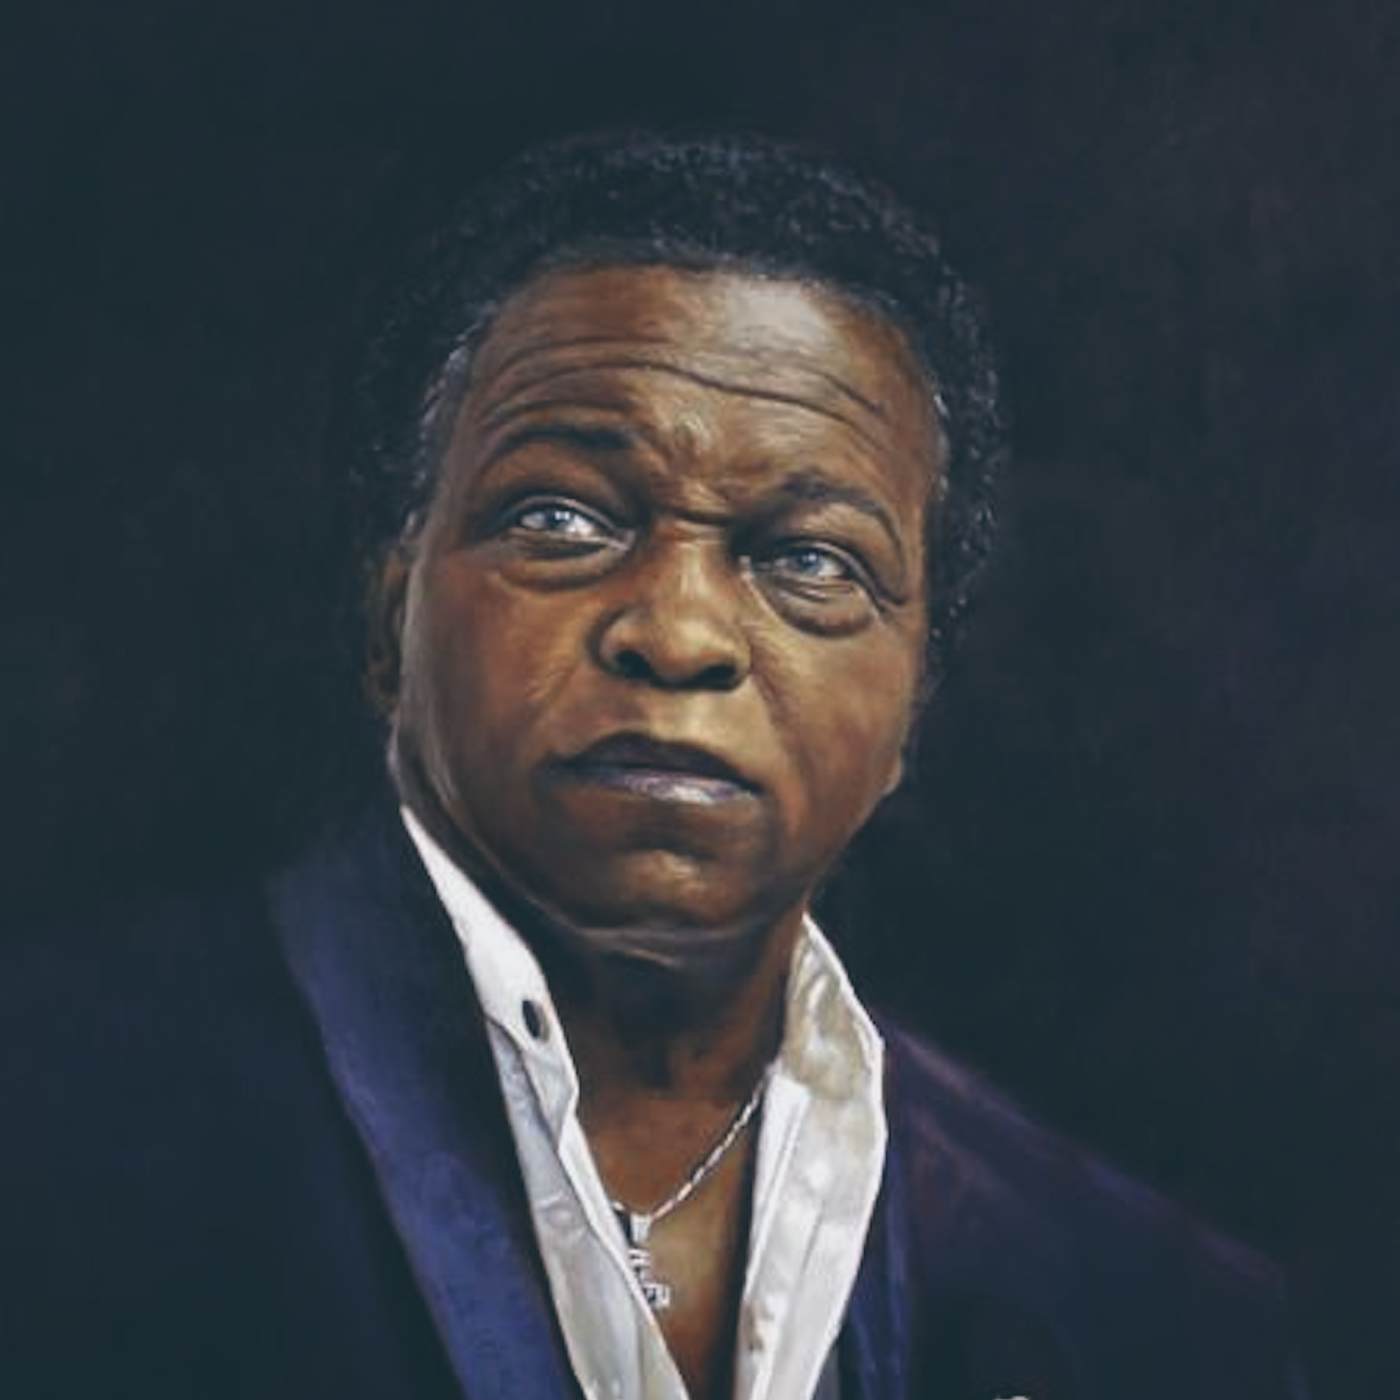 Lee Fields & The Expressions